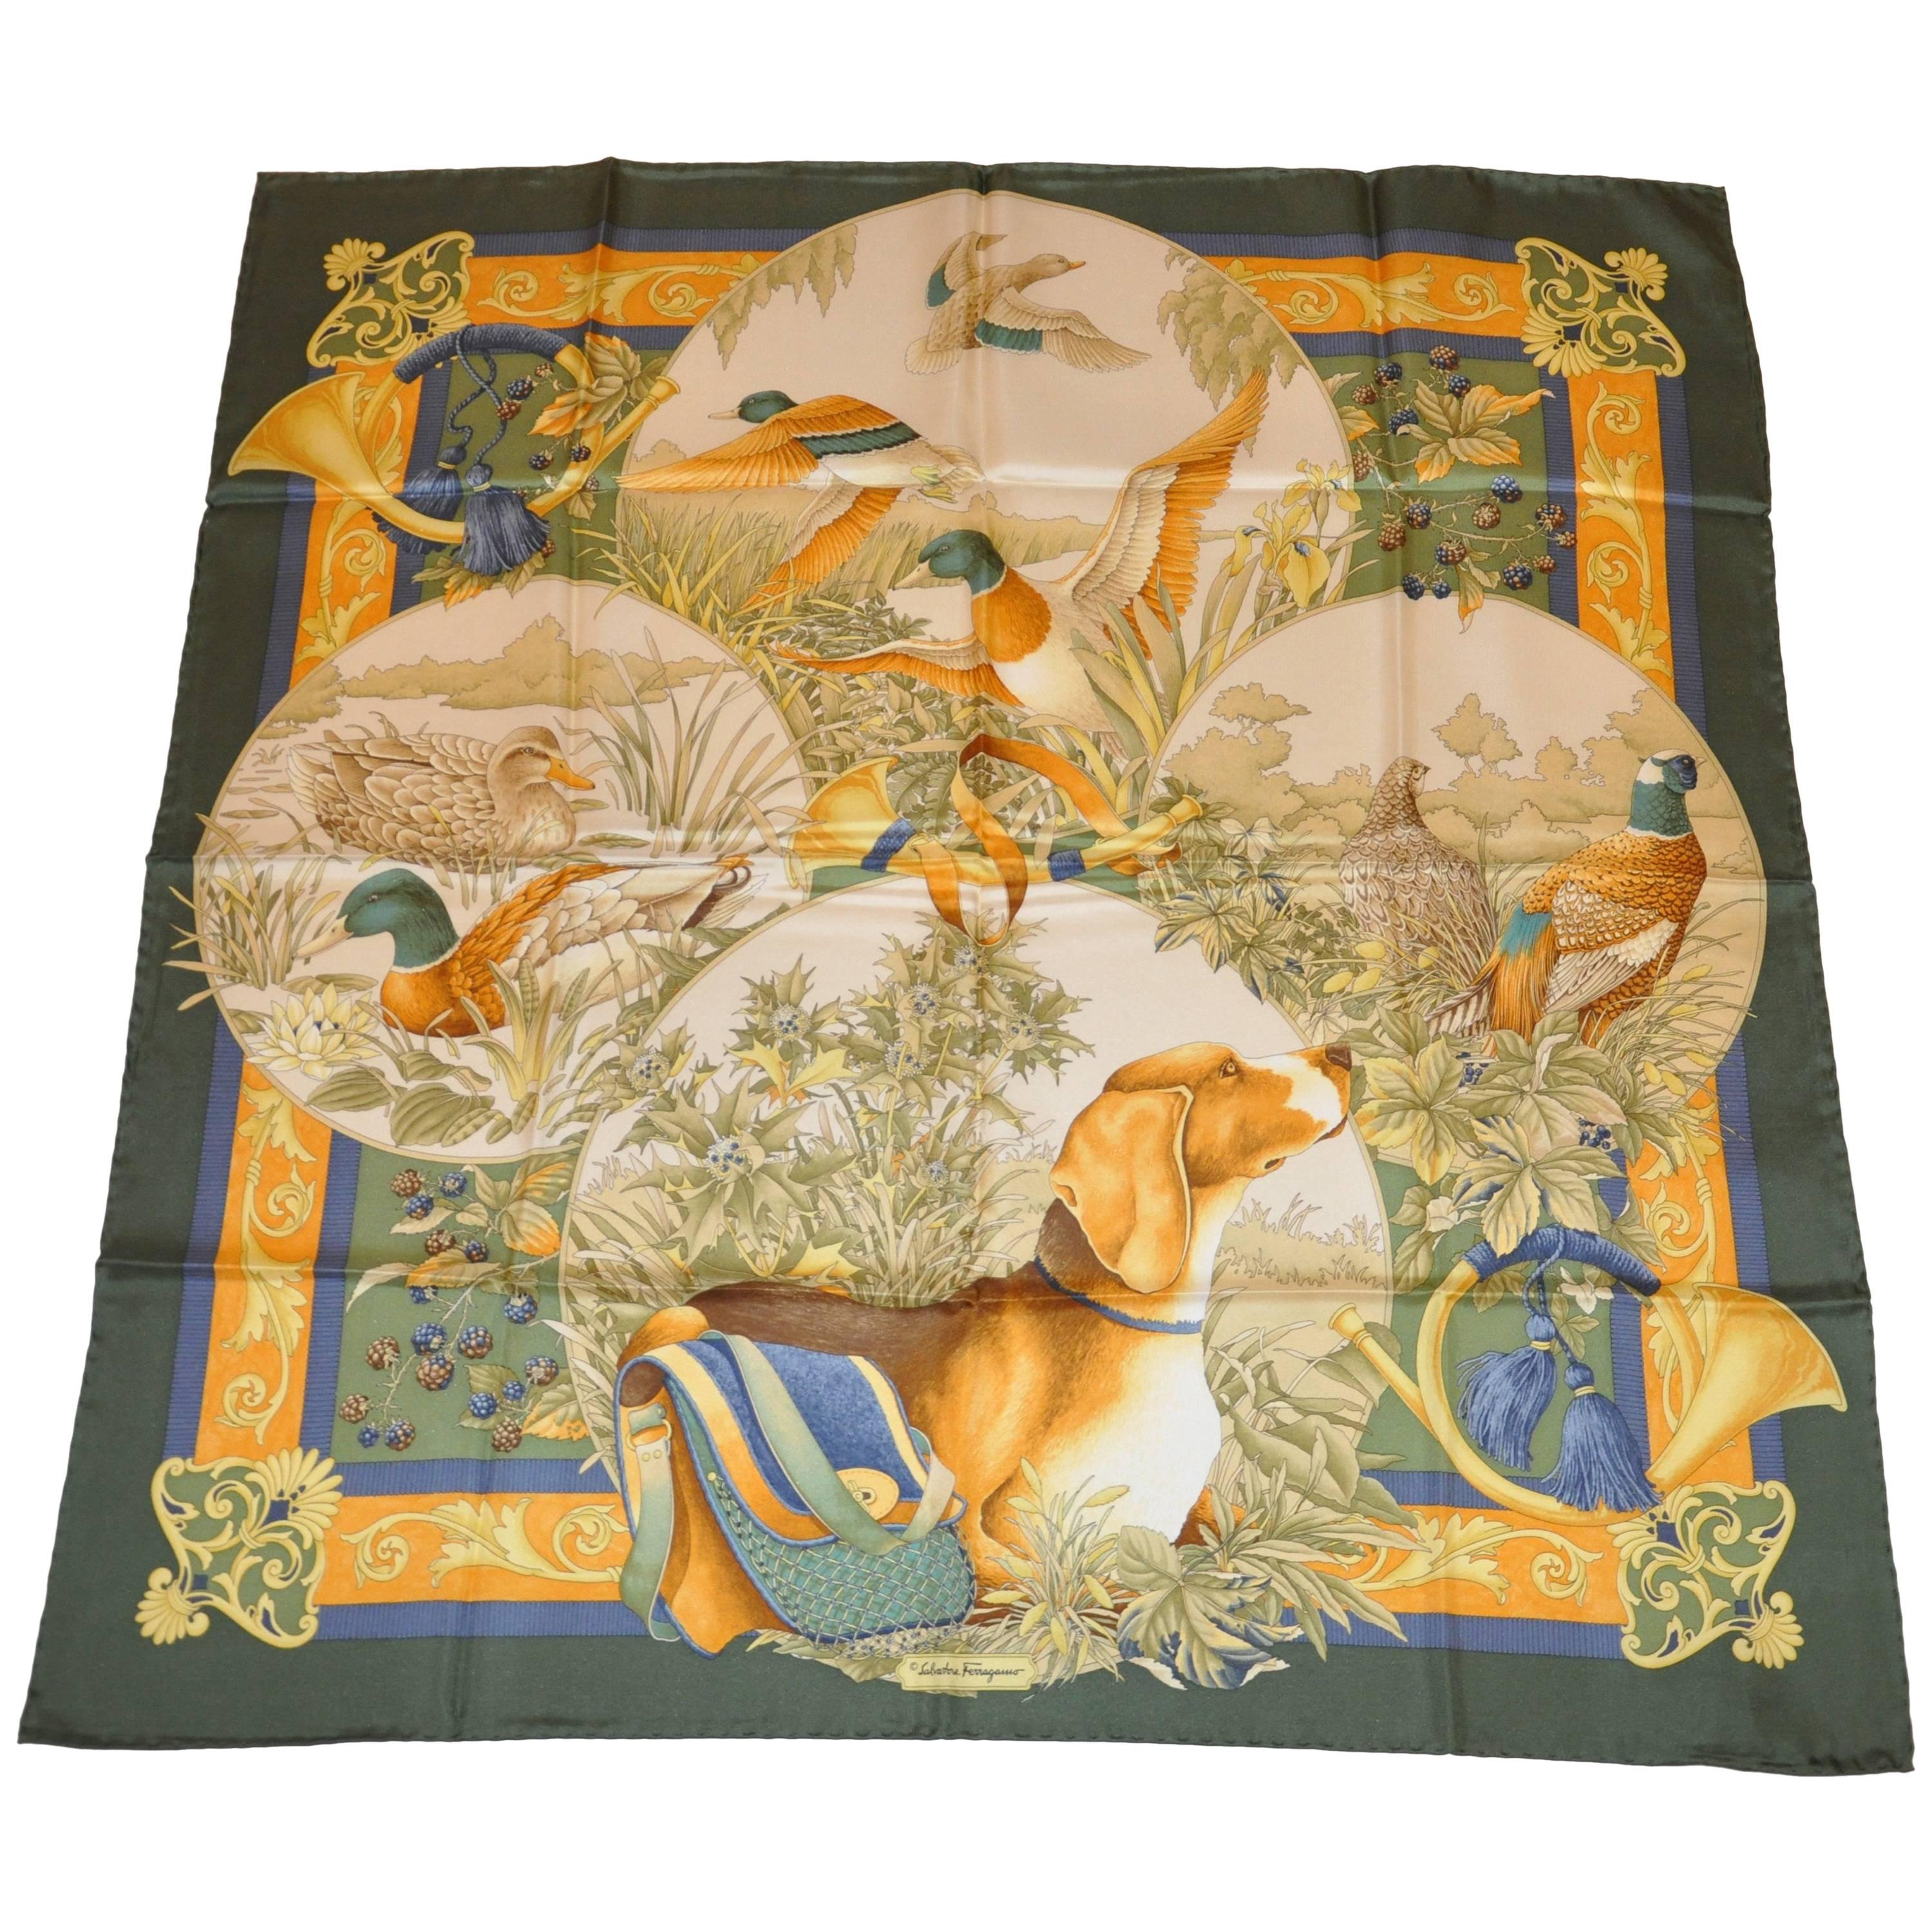 Ferragamo Hound and Collection of Fowls Silk Jacquard Scarf